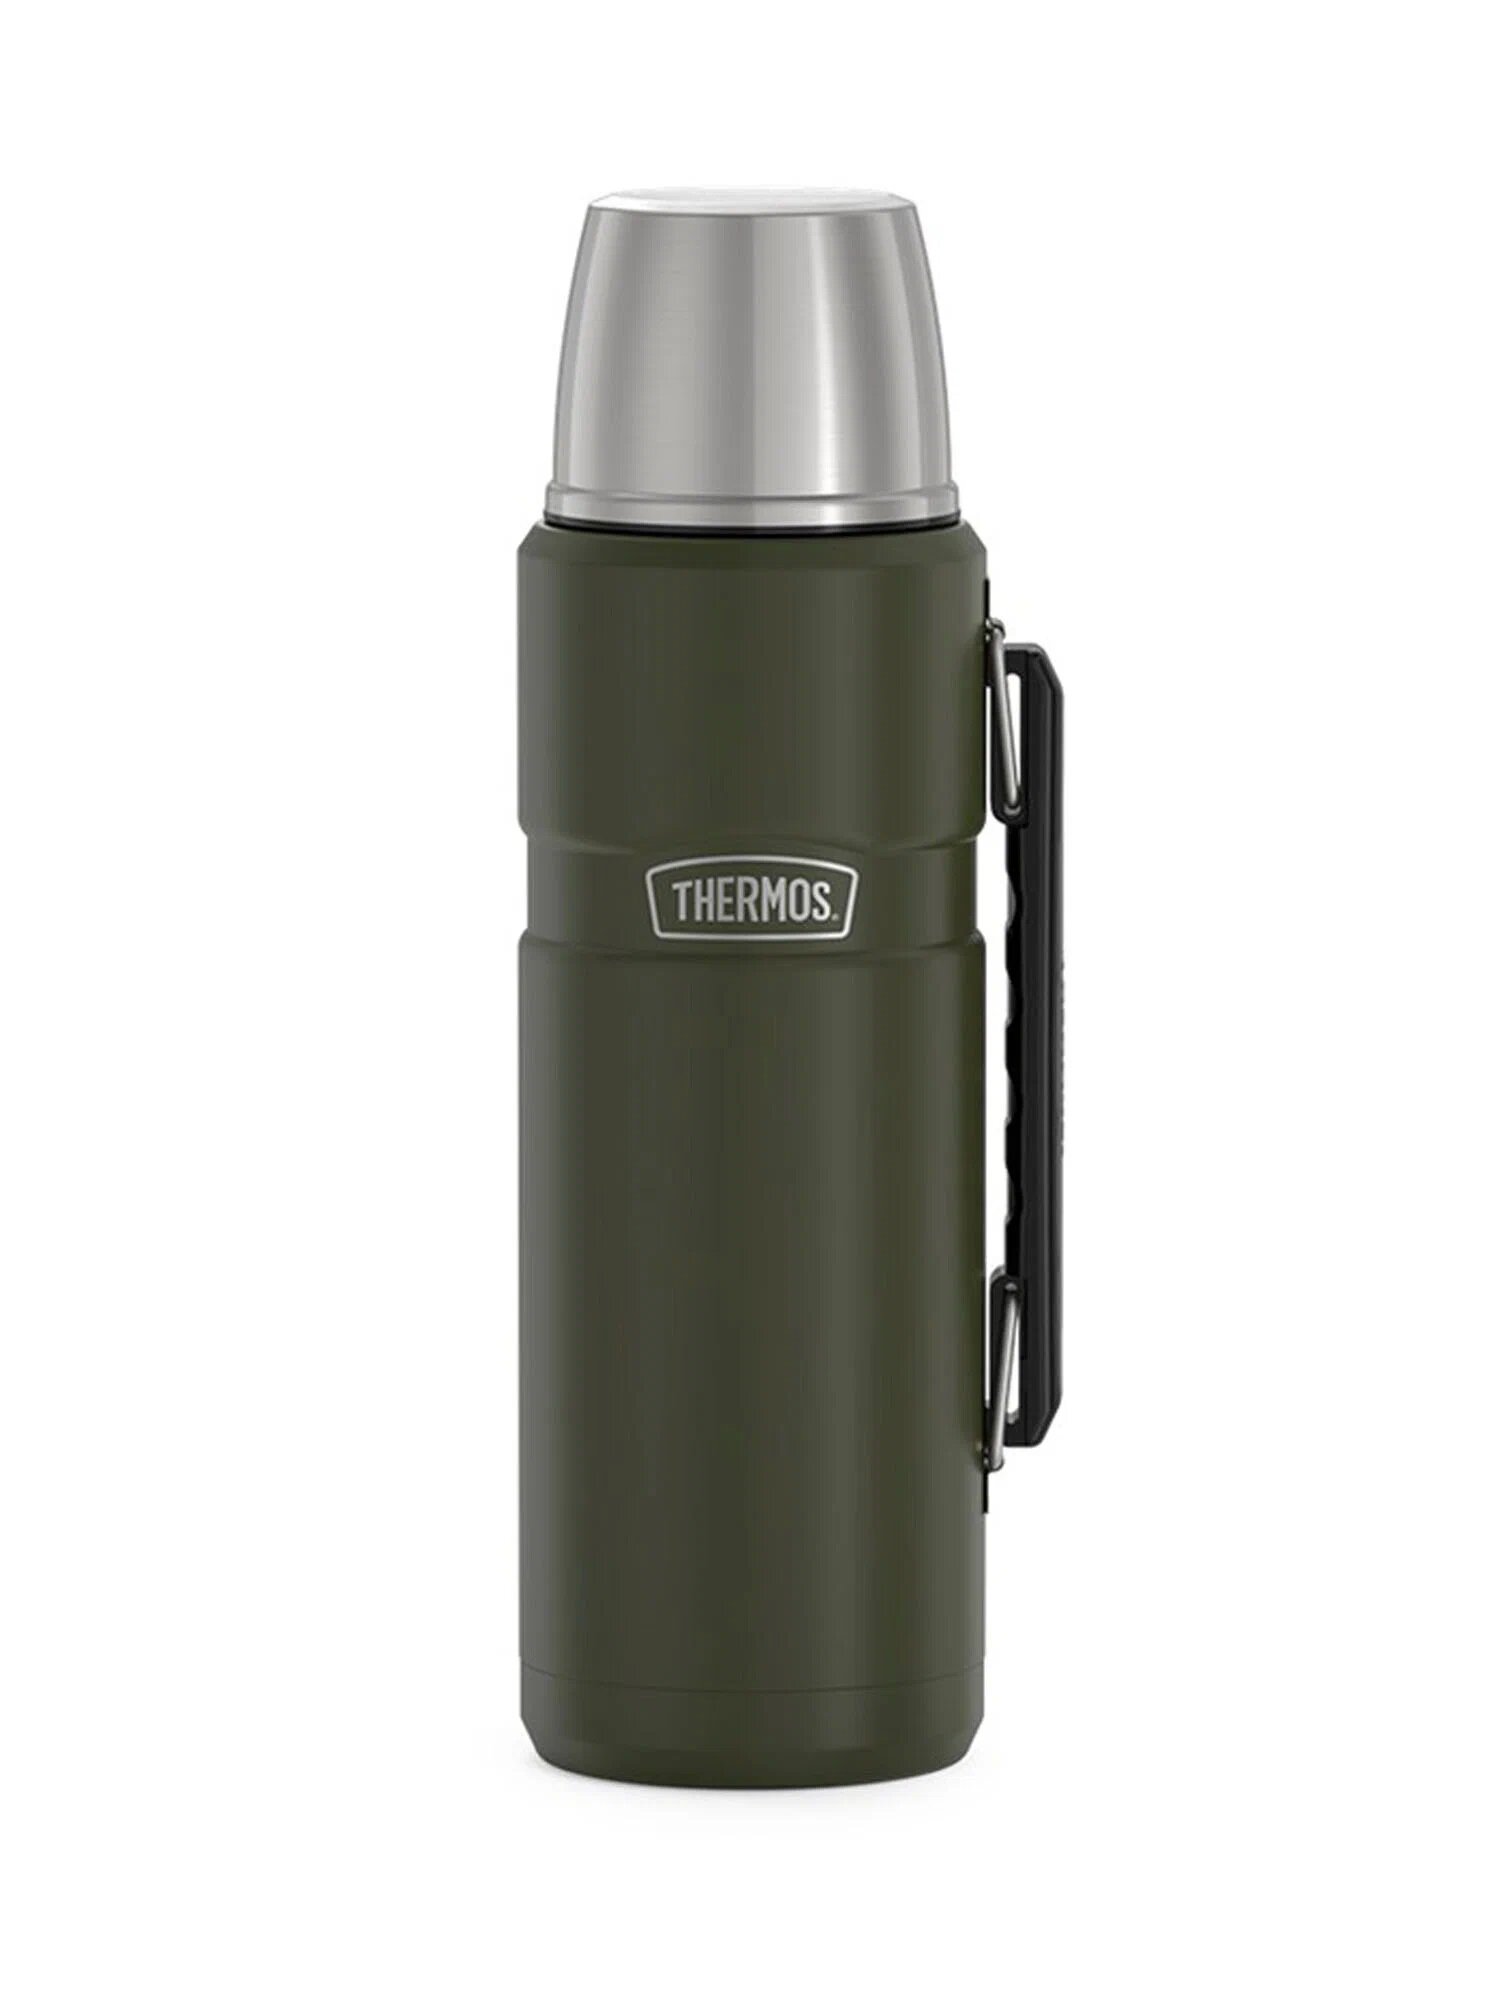 Thermos Термос King SK2010 AG, хаки (1,2 л.)